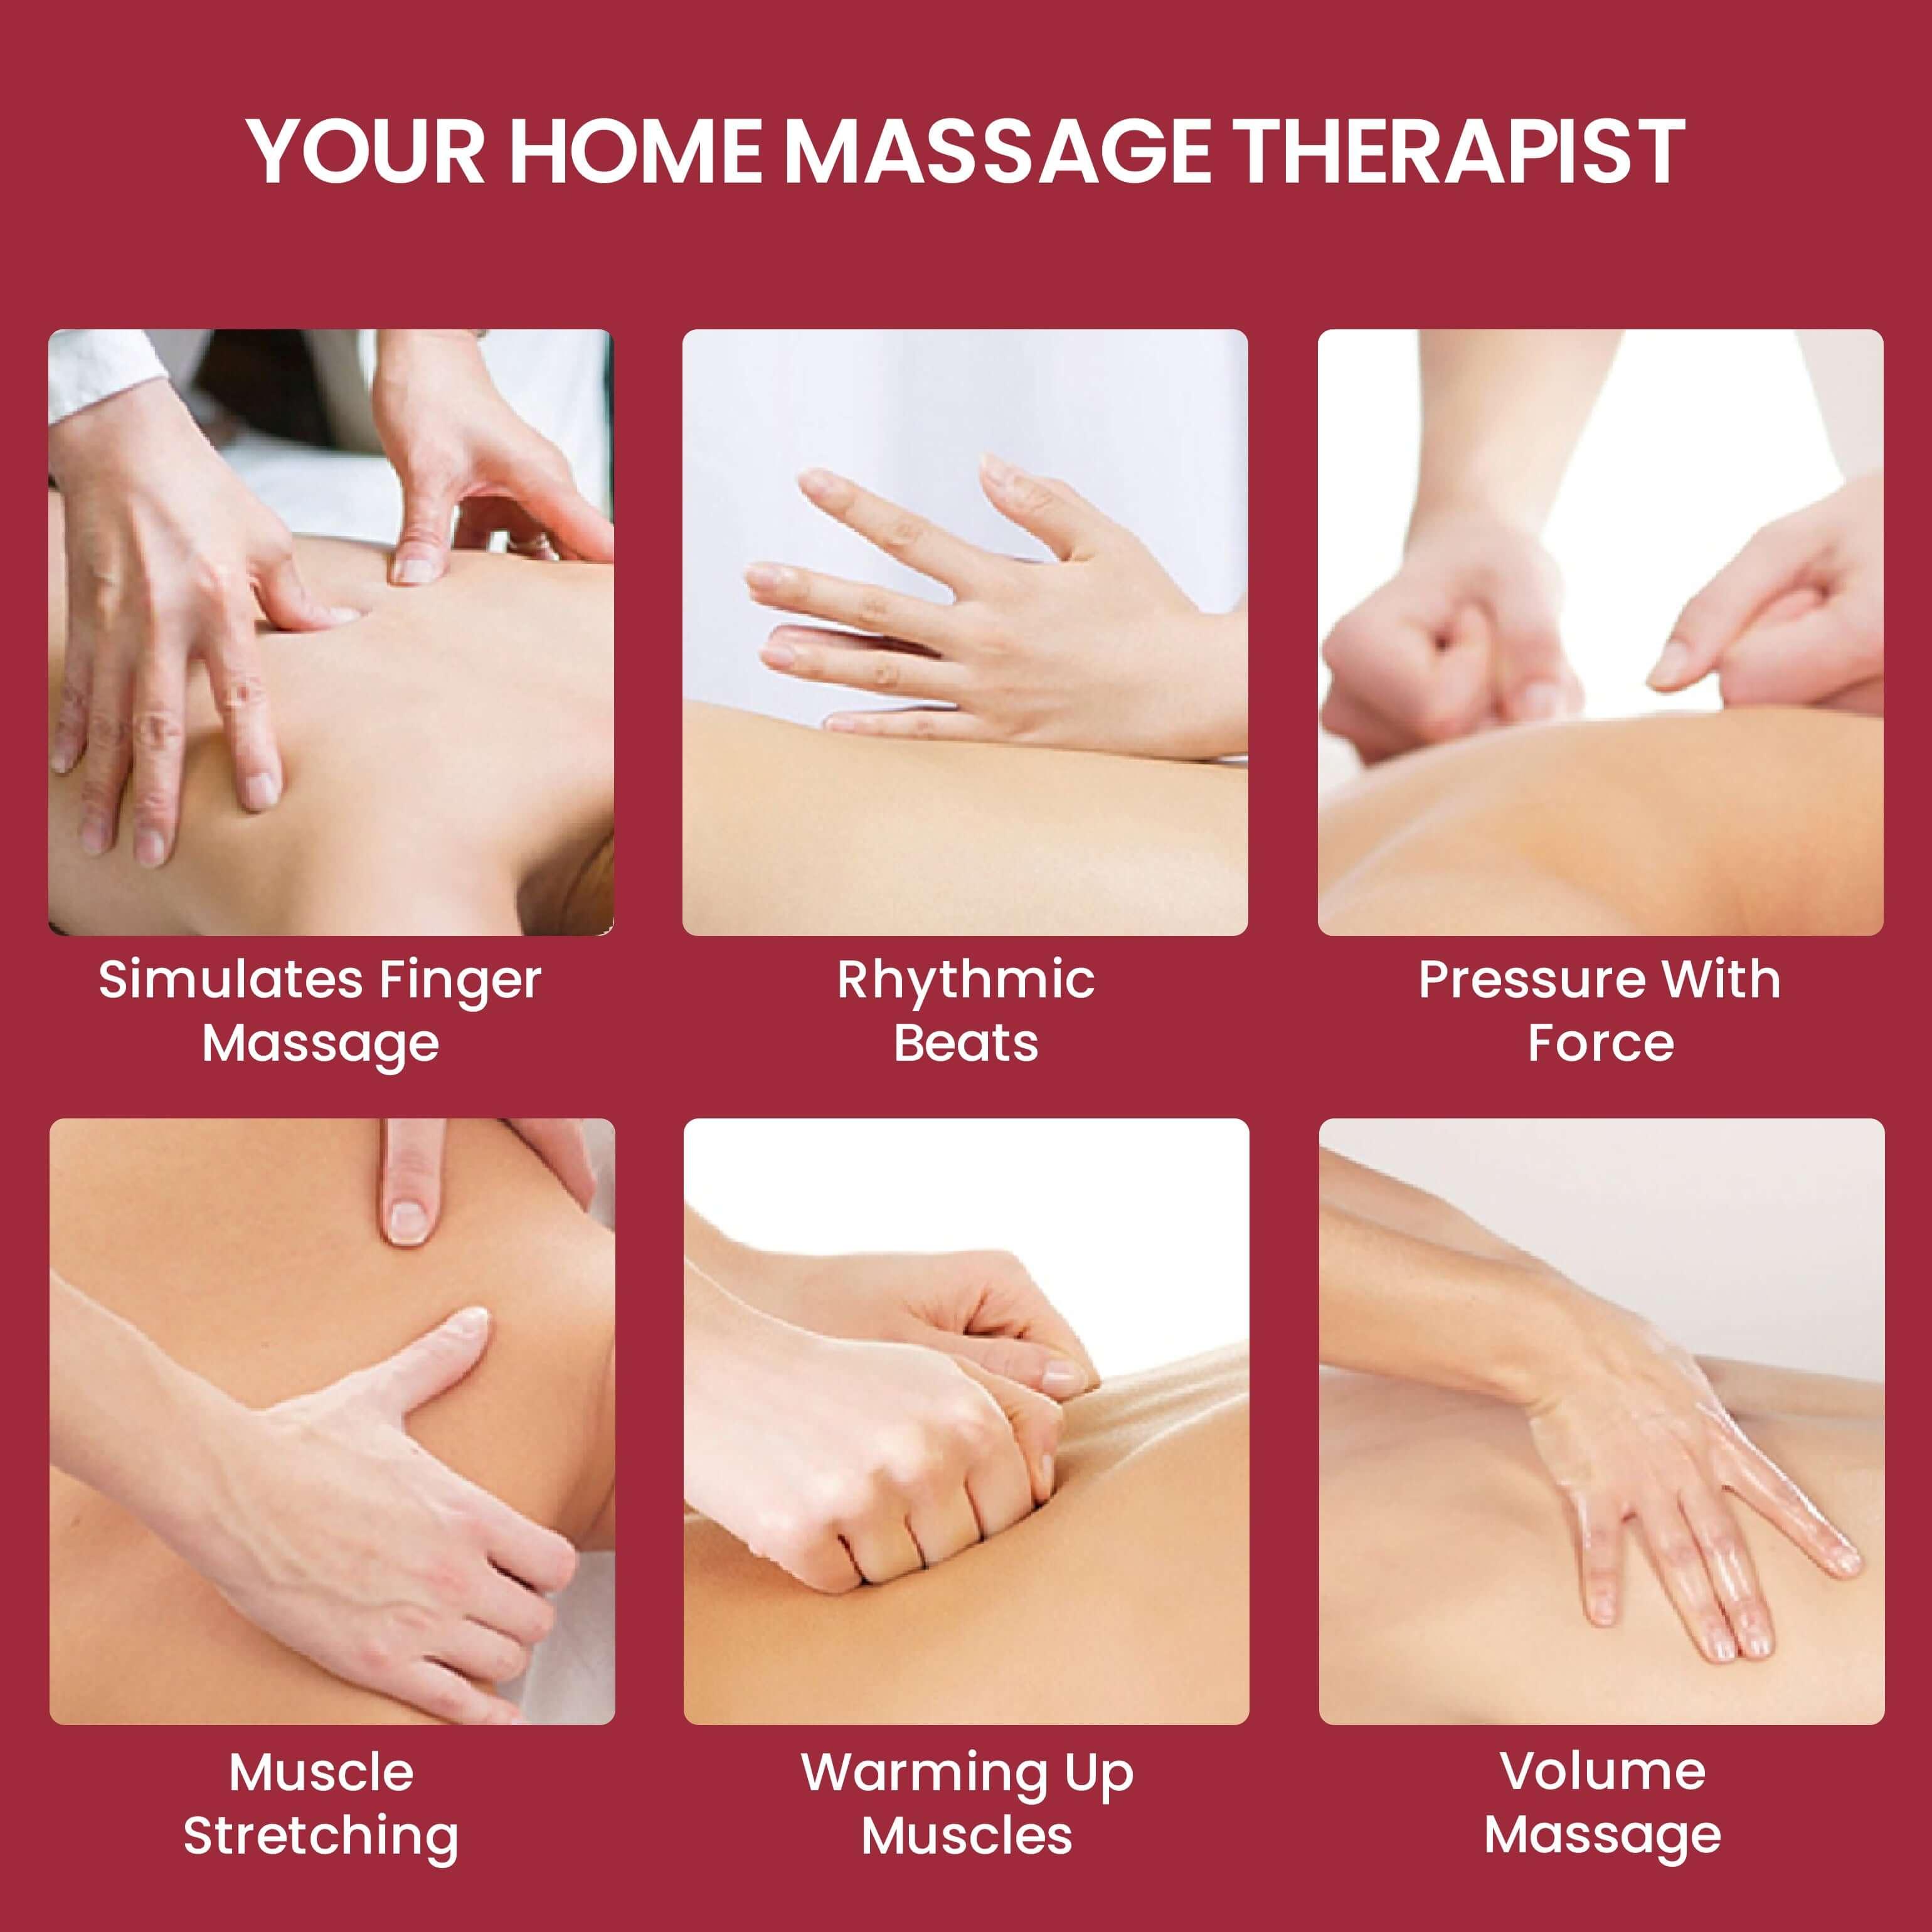 Features of a home massage therapist showcasing simulated finger massage, rhythmic beats, pressure with force, muscle stretching, warming up muscles, and volume massage. best massage chair uae, massage chair Dubai, massage chair uae, massage chair Saudi A